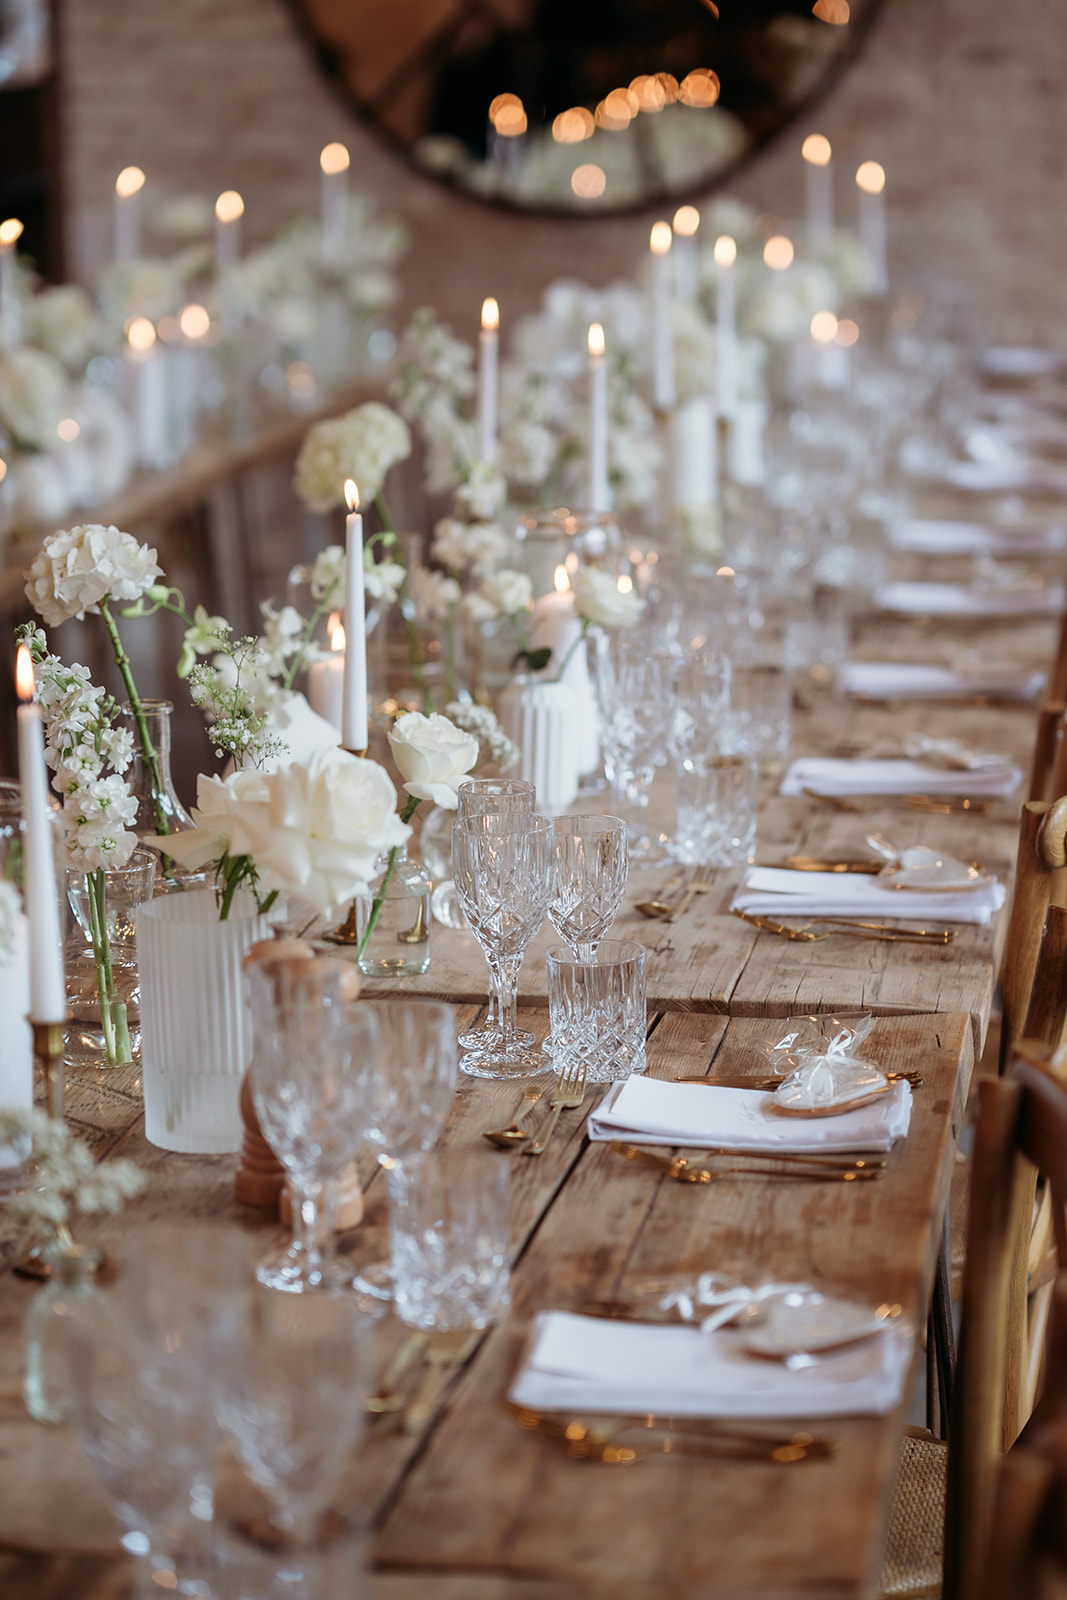 An intimate modern chic white themed luxury wedding at Iscoyd Park for Australian couple by Kamila Novak Photography